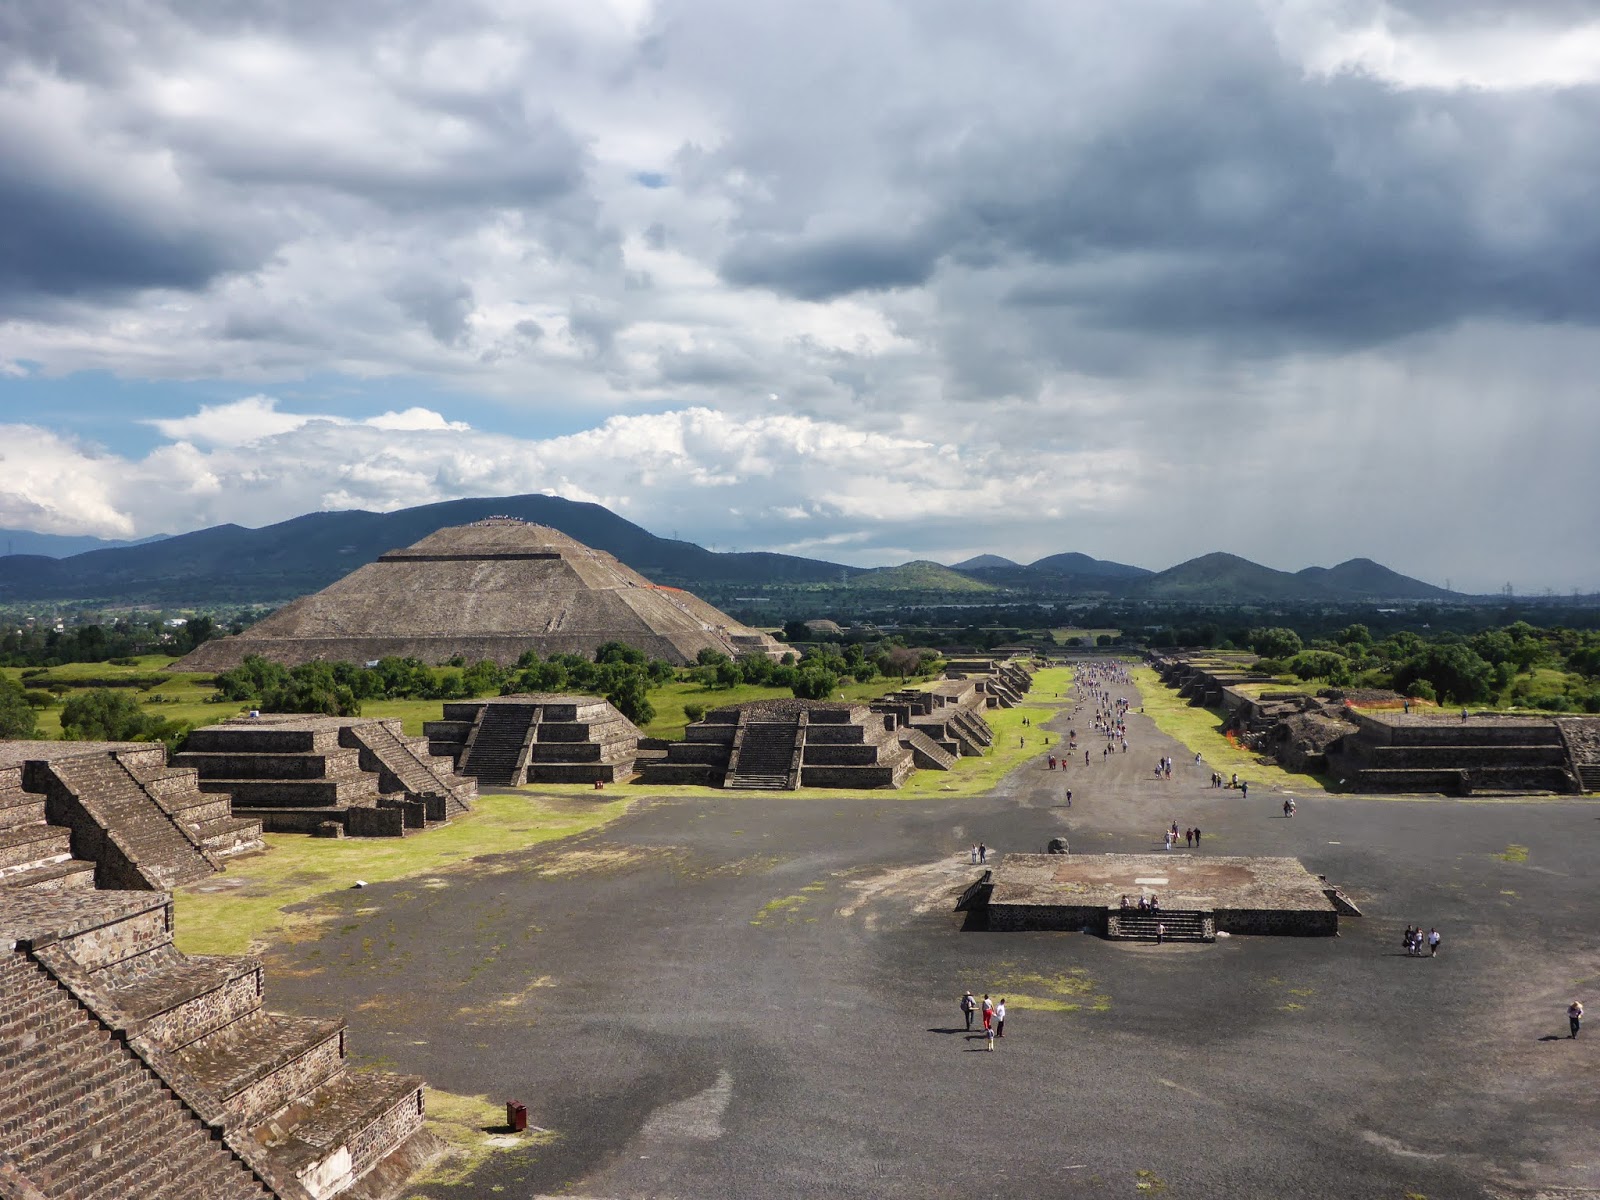  Teotihuacan, Mexico